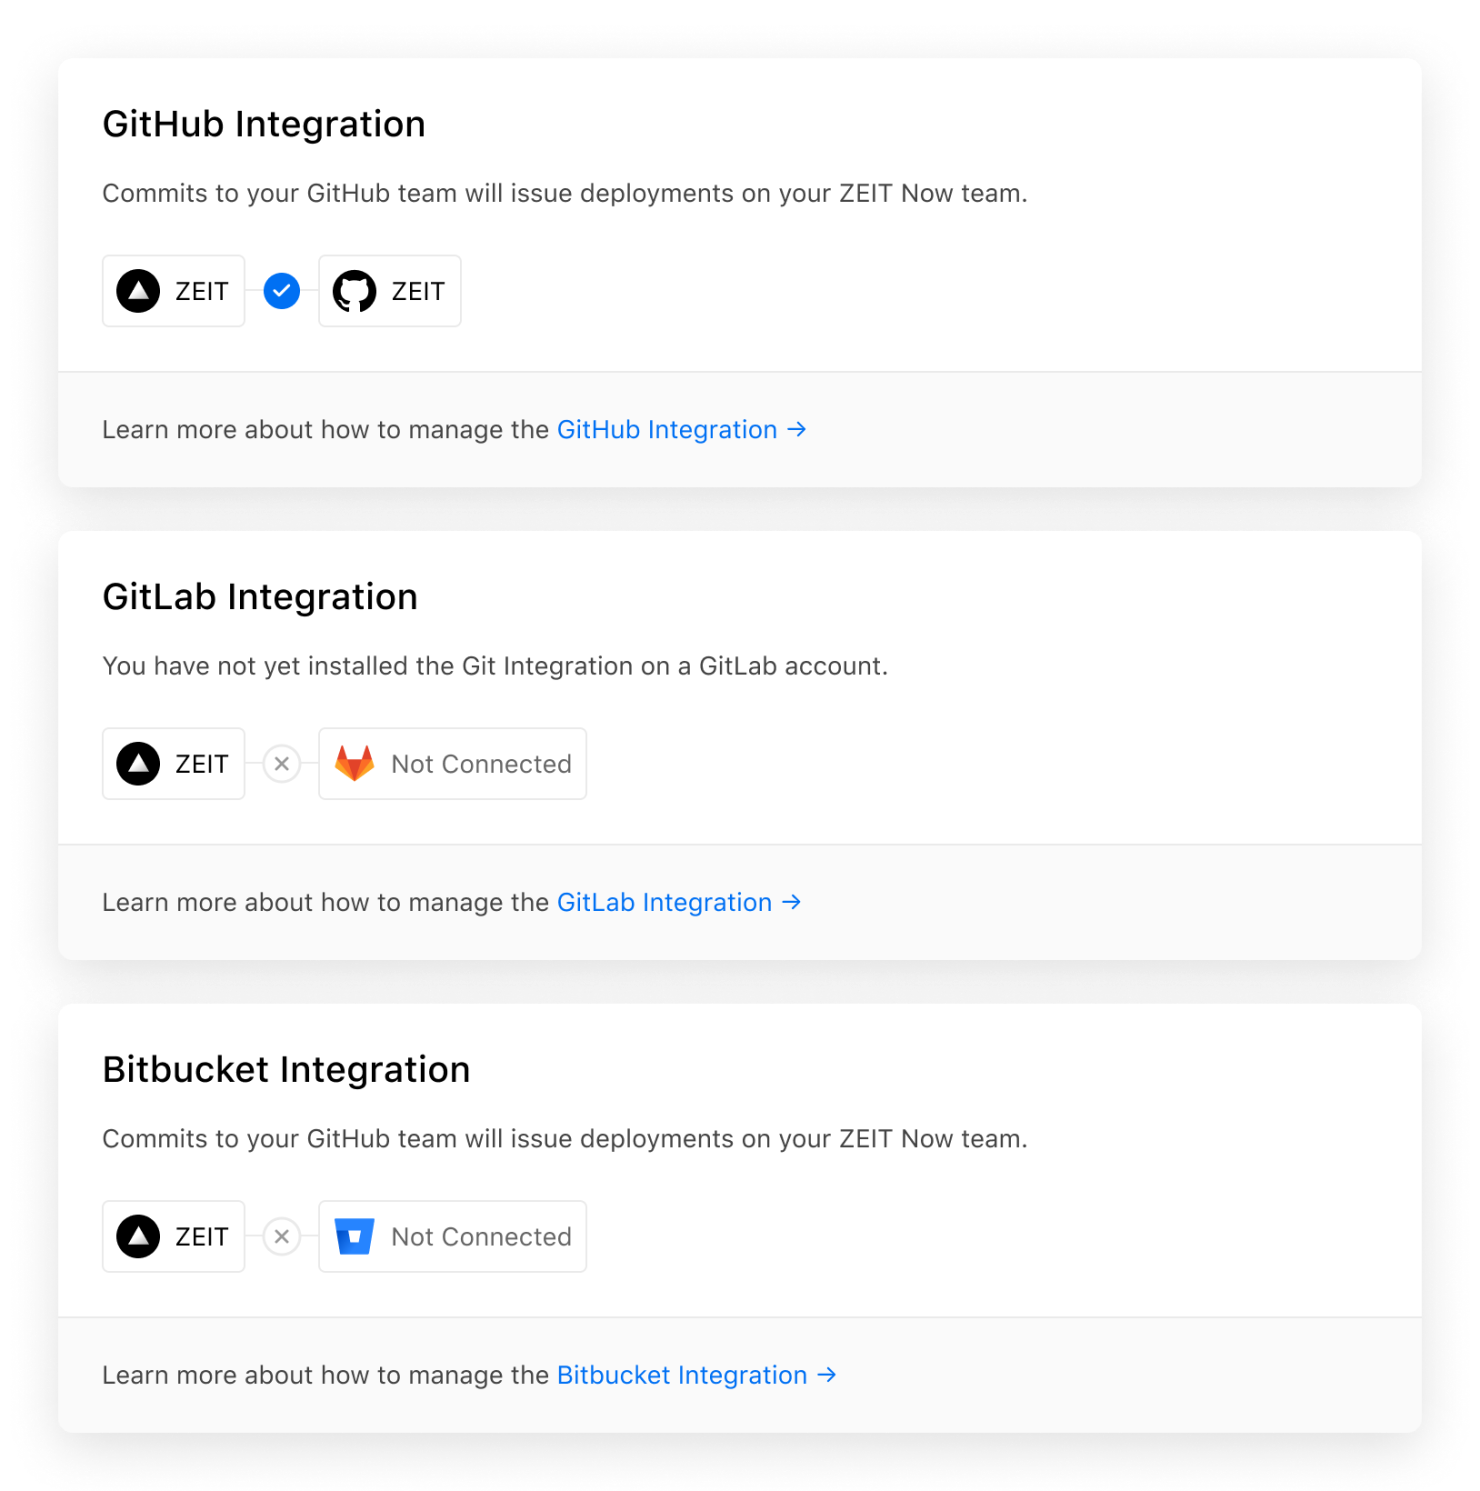 The refined "Git Integrations" settings page for personal accounts and teams.